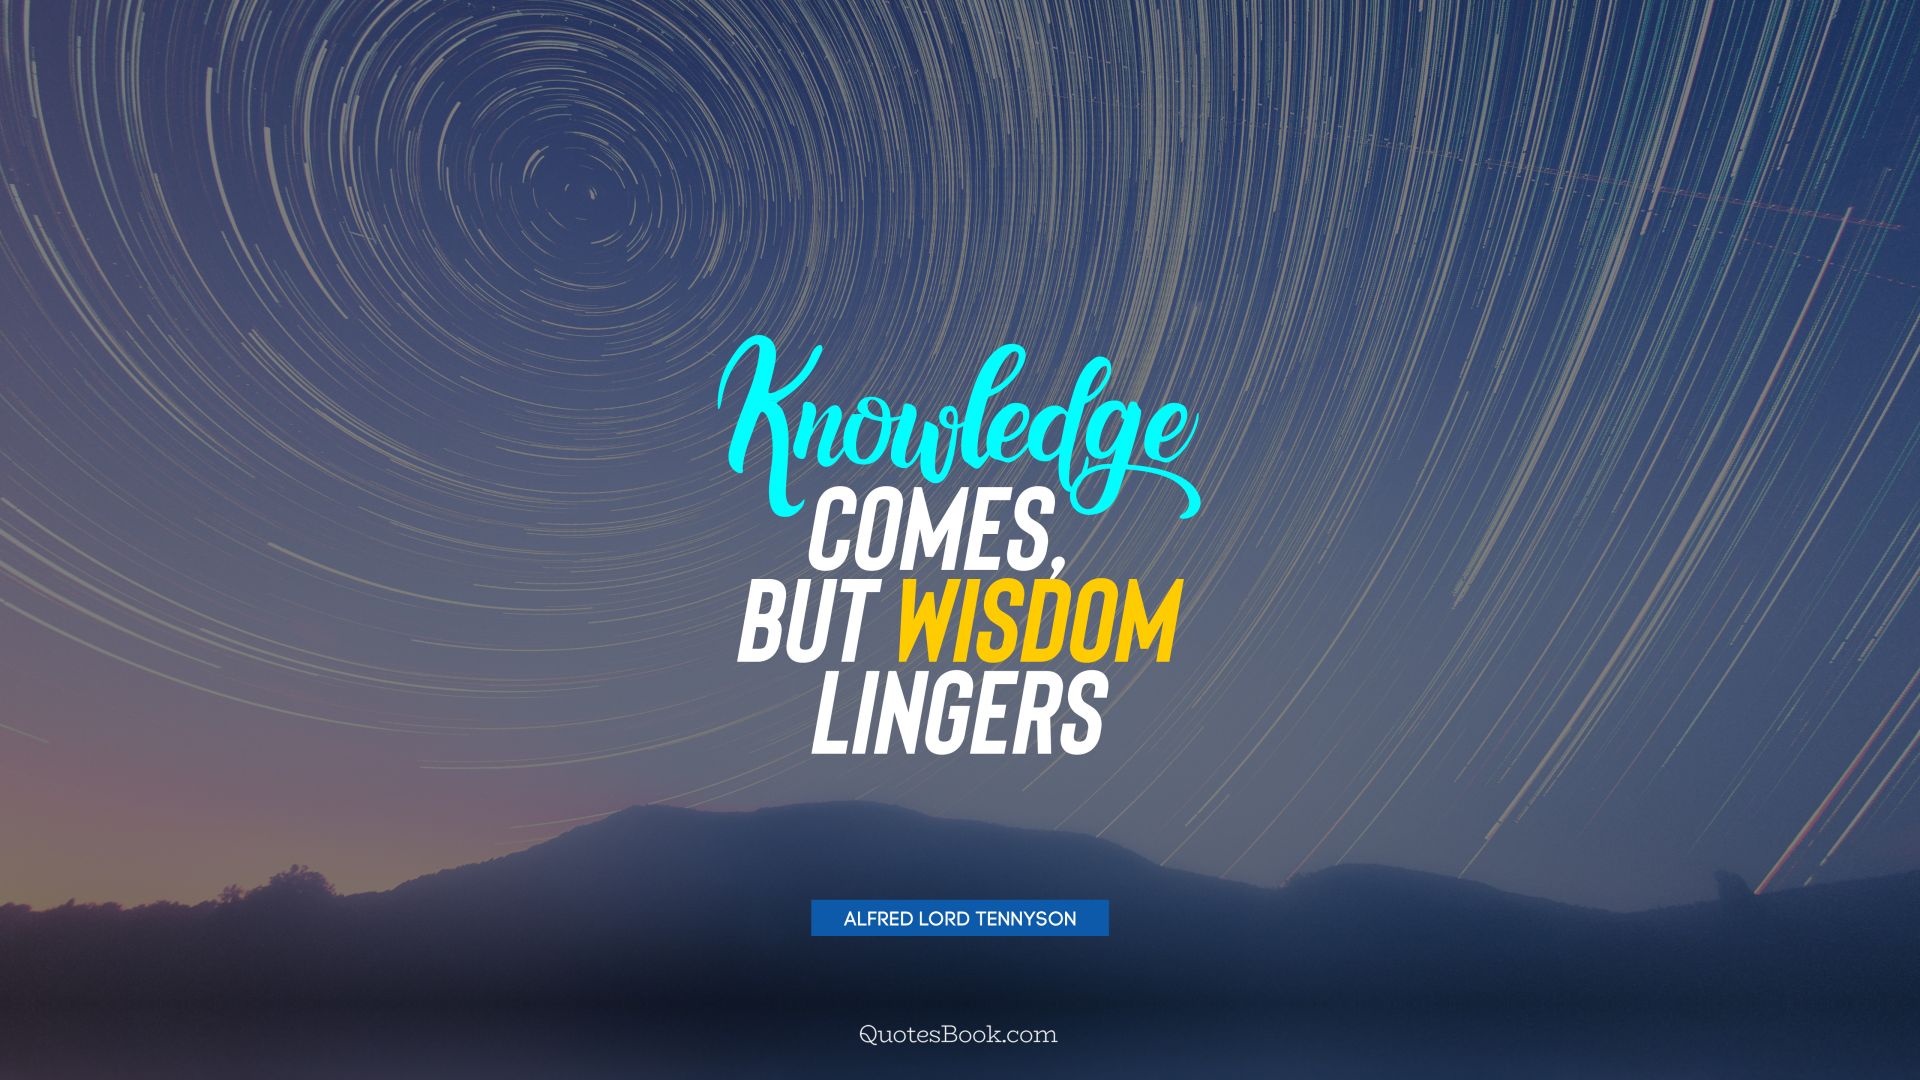 Knowledge comes, but wisdom lingers. - Quote by Alfred Lord Tennyson